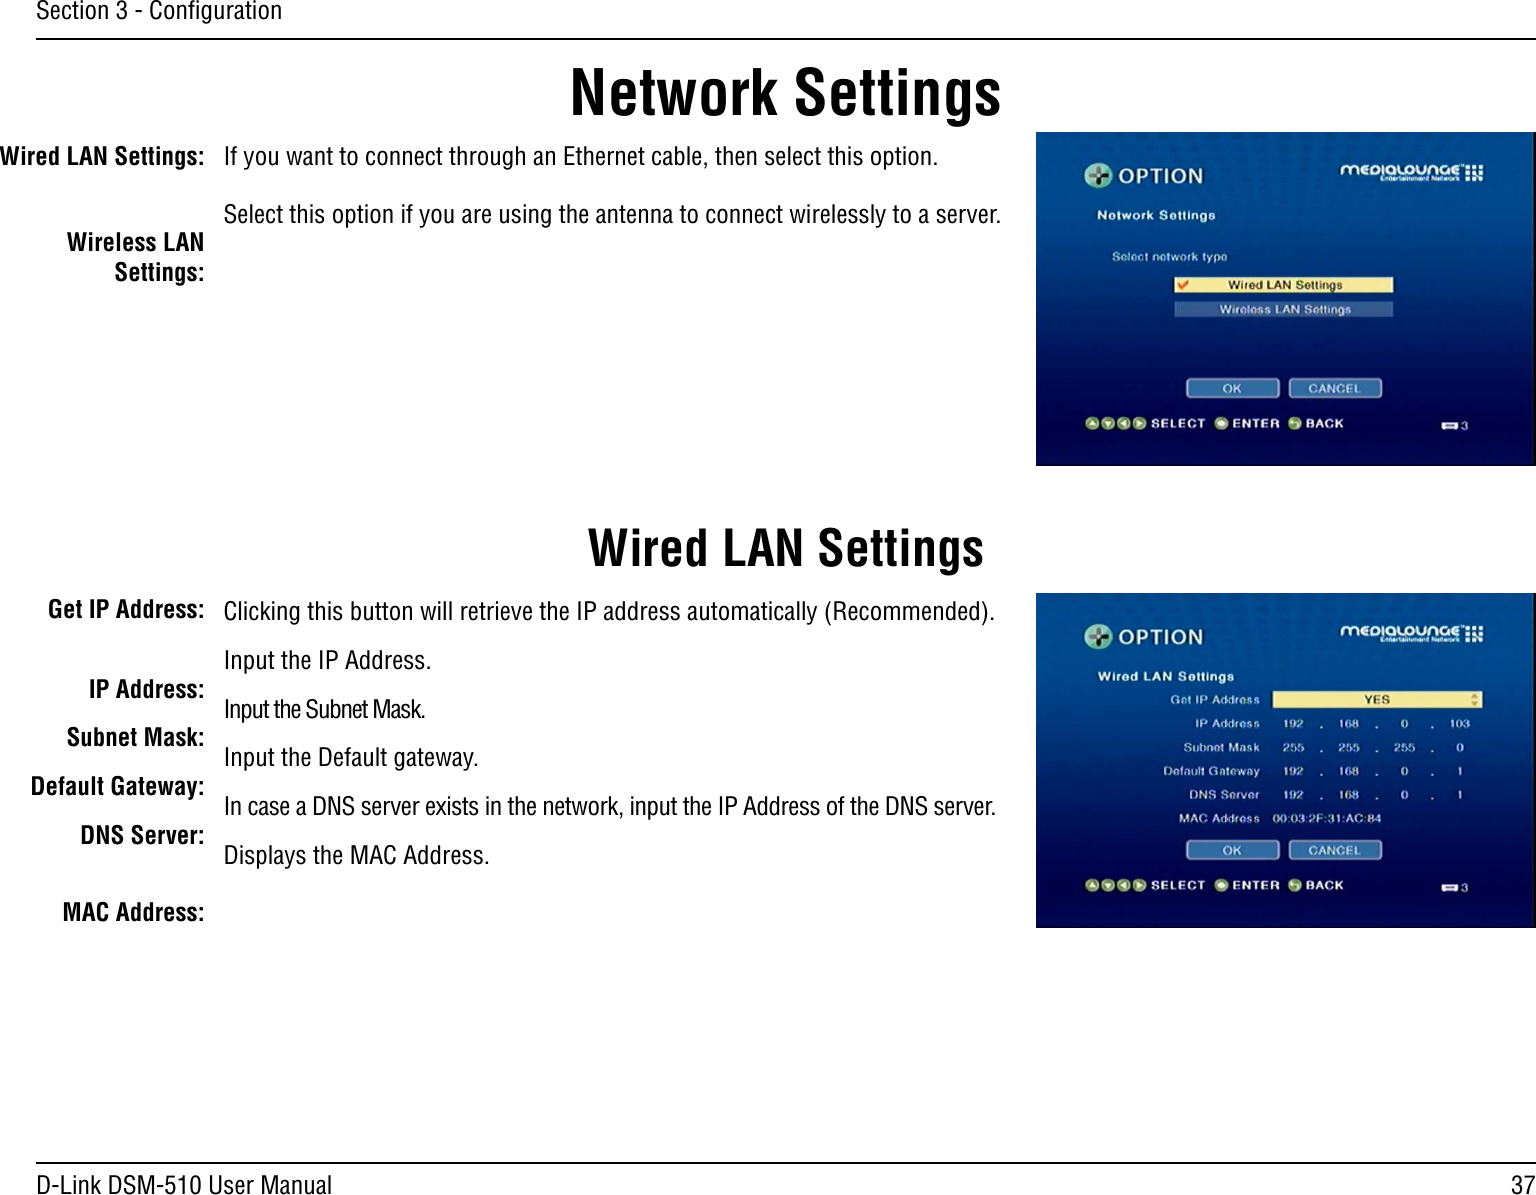 37D-Link DSM-510 User ManualSection 3 - ConﬁgurationWired LAN Settings:Wireless LAN Settings:If you want to connect through an Ethernet cable, then select this option.Select this option if you are using the antenna to connect wirelessly to a server.Network SettingsWired LAN SettingsGet IP Address:IP Address:Subnet Mask:Default Gateway:   DNS Server:MAC Address:Clicking this button will retrieve the IP address automatically (Recommended).Input the IP Address.Input the Subnet Mask.Input the Default gateway.In case a DNS server exists in the network, input the IP Address of the DNS server.Displays the MAC Address.